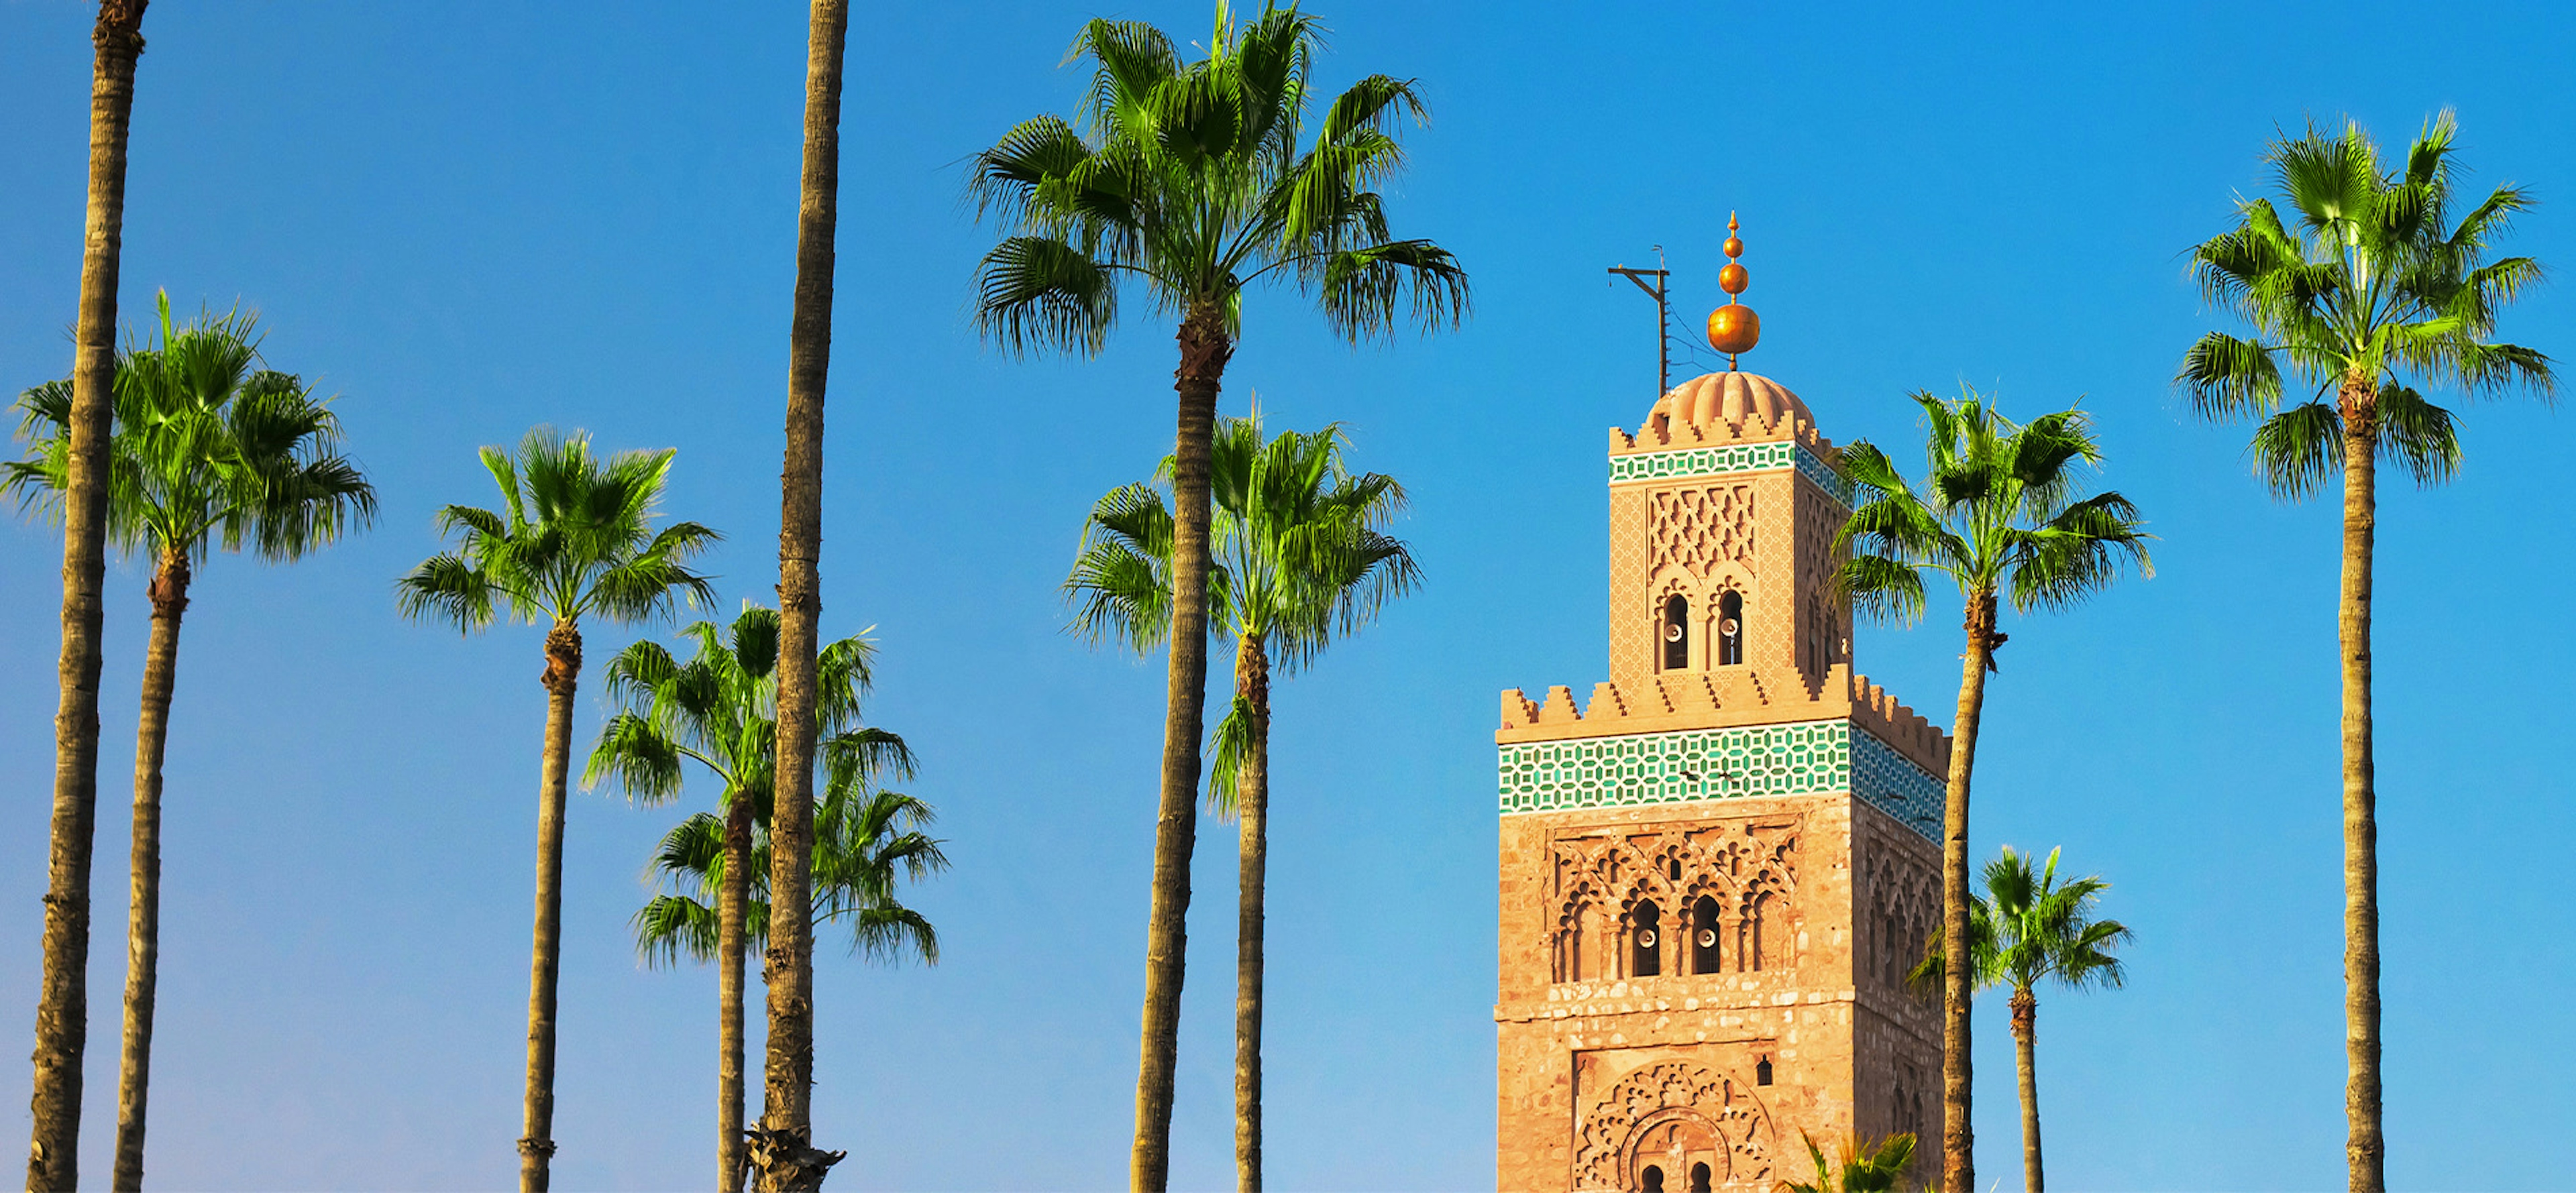 Blue sky, palm trees and a small tower in marrakech